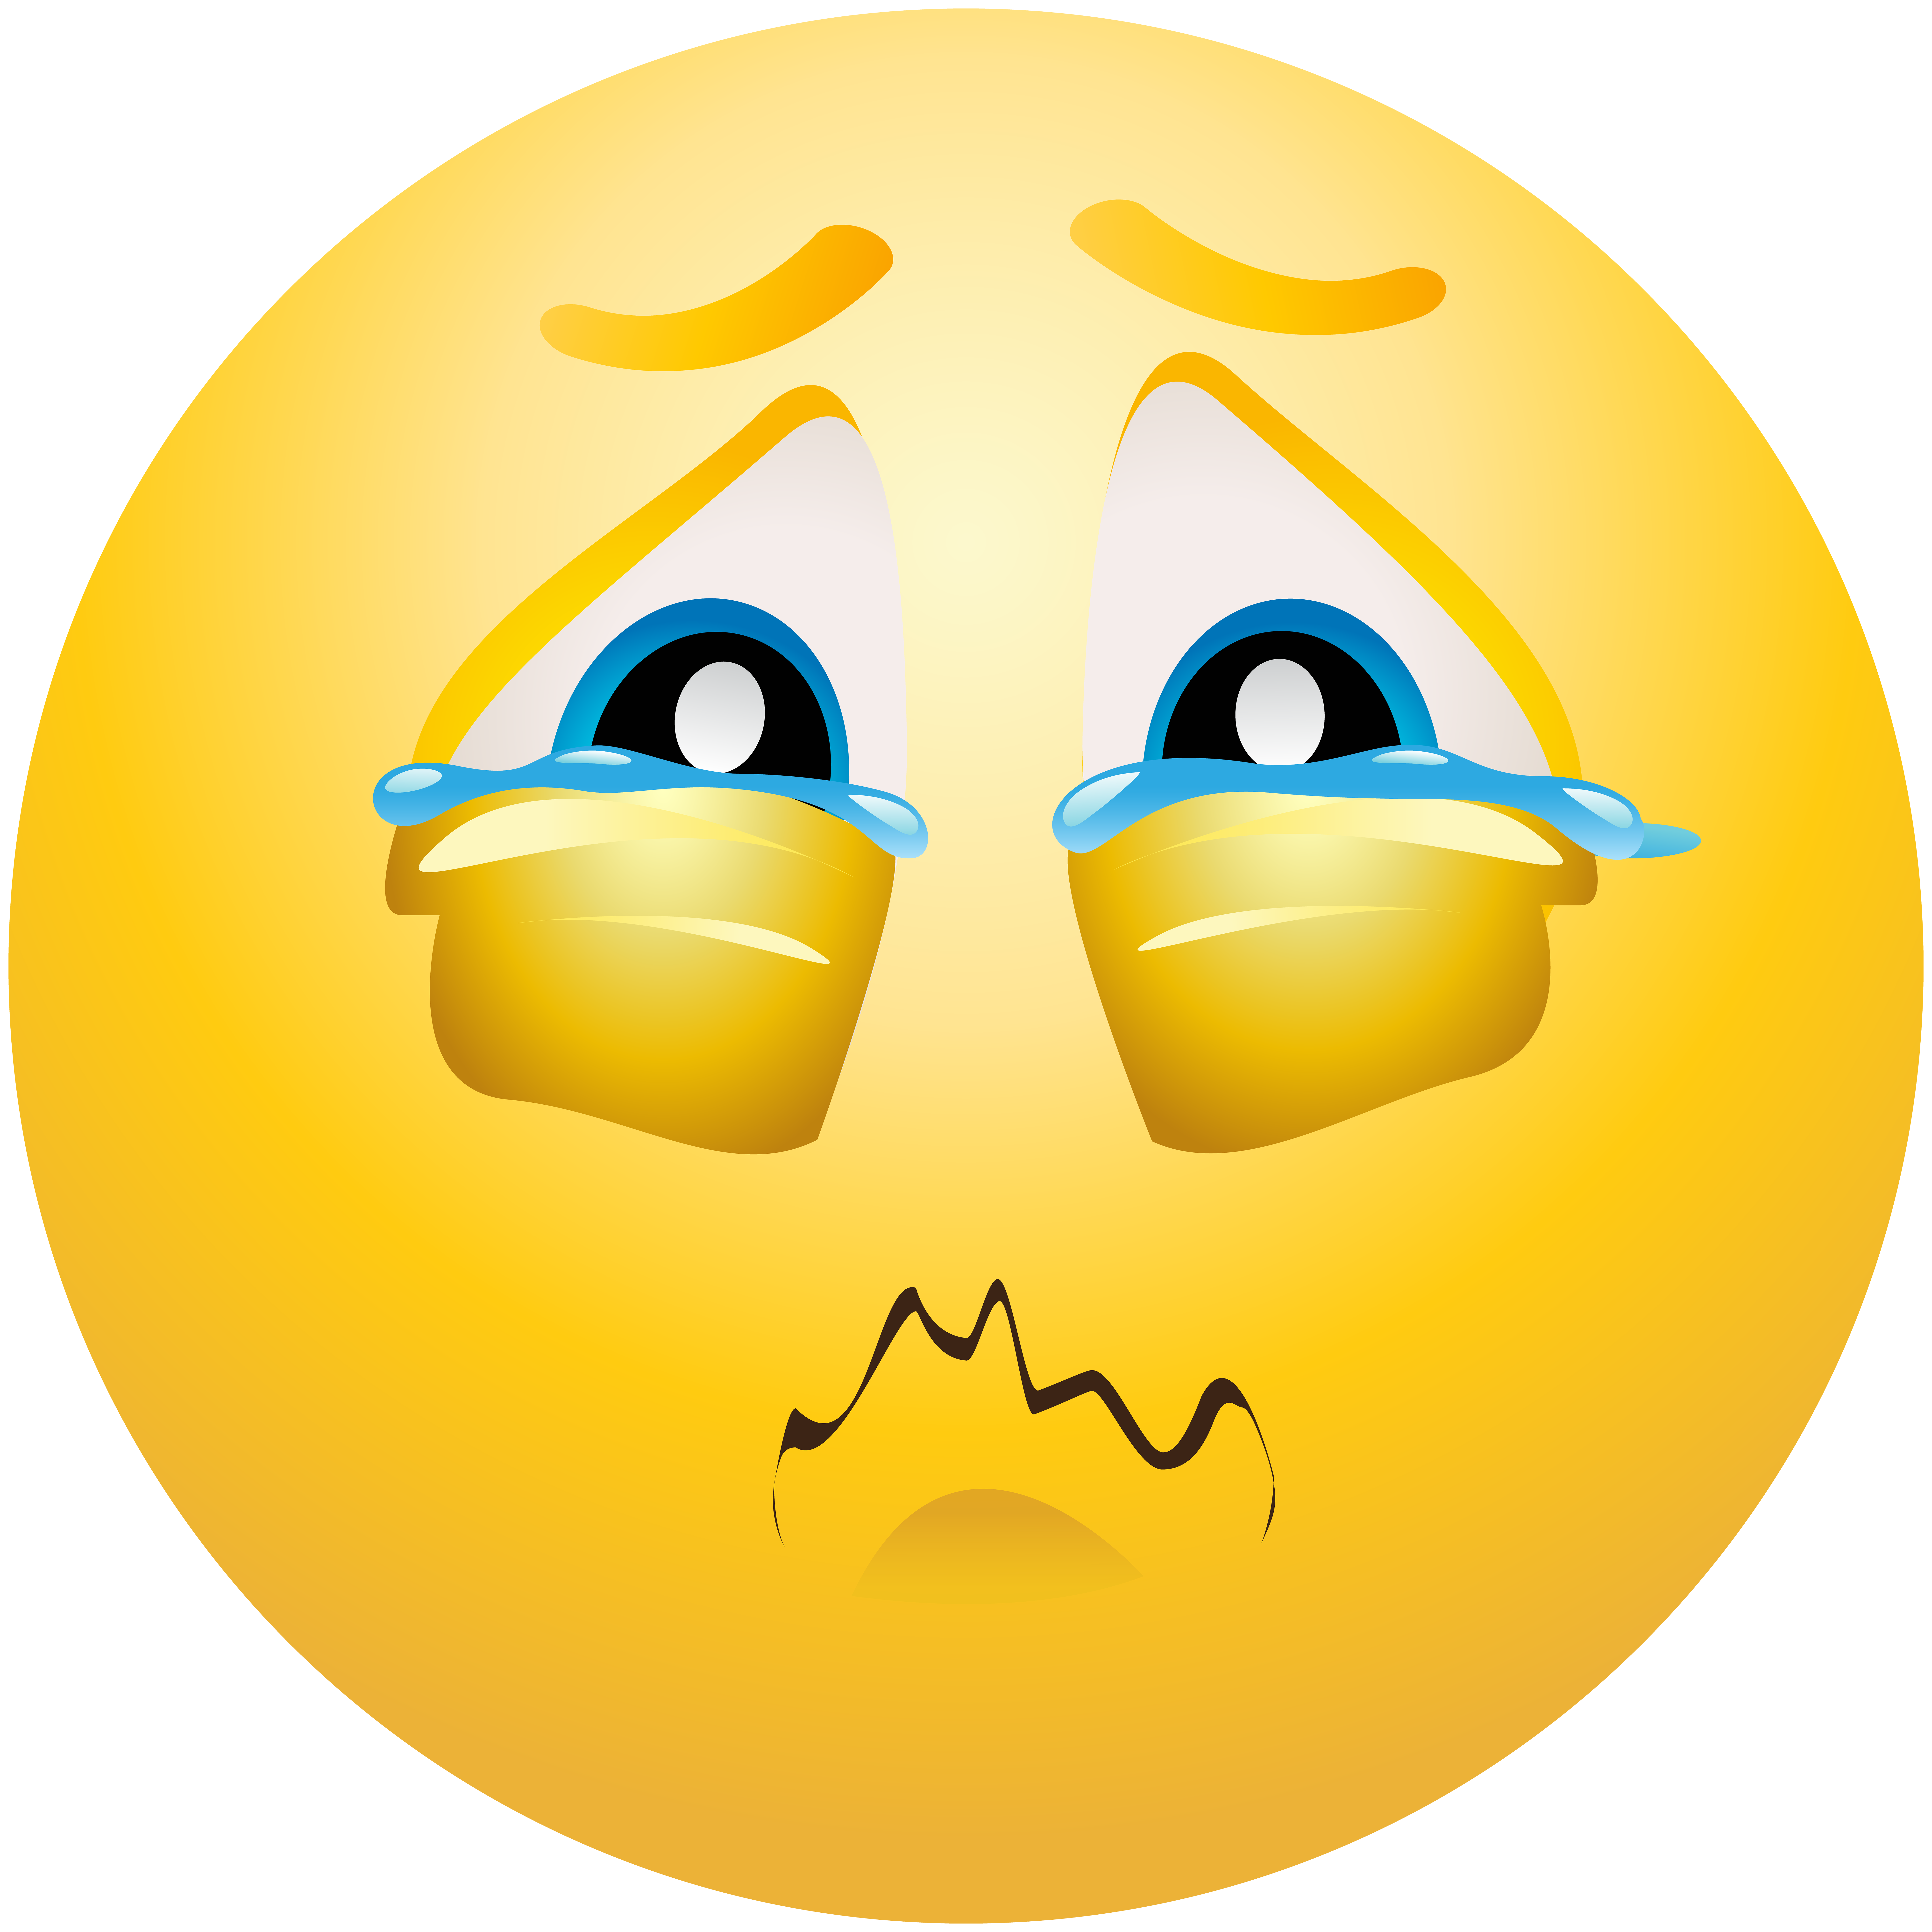 clipart crying